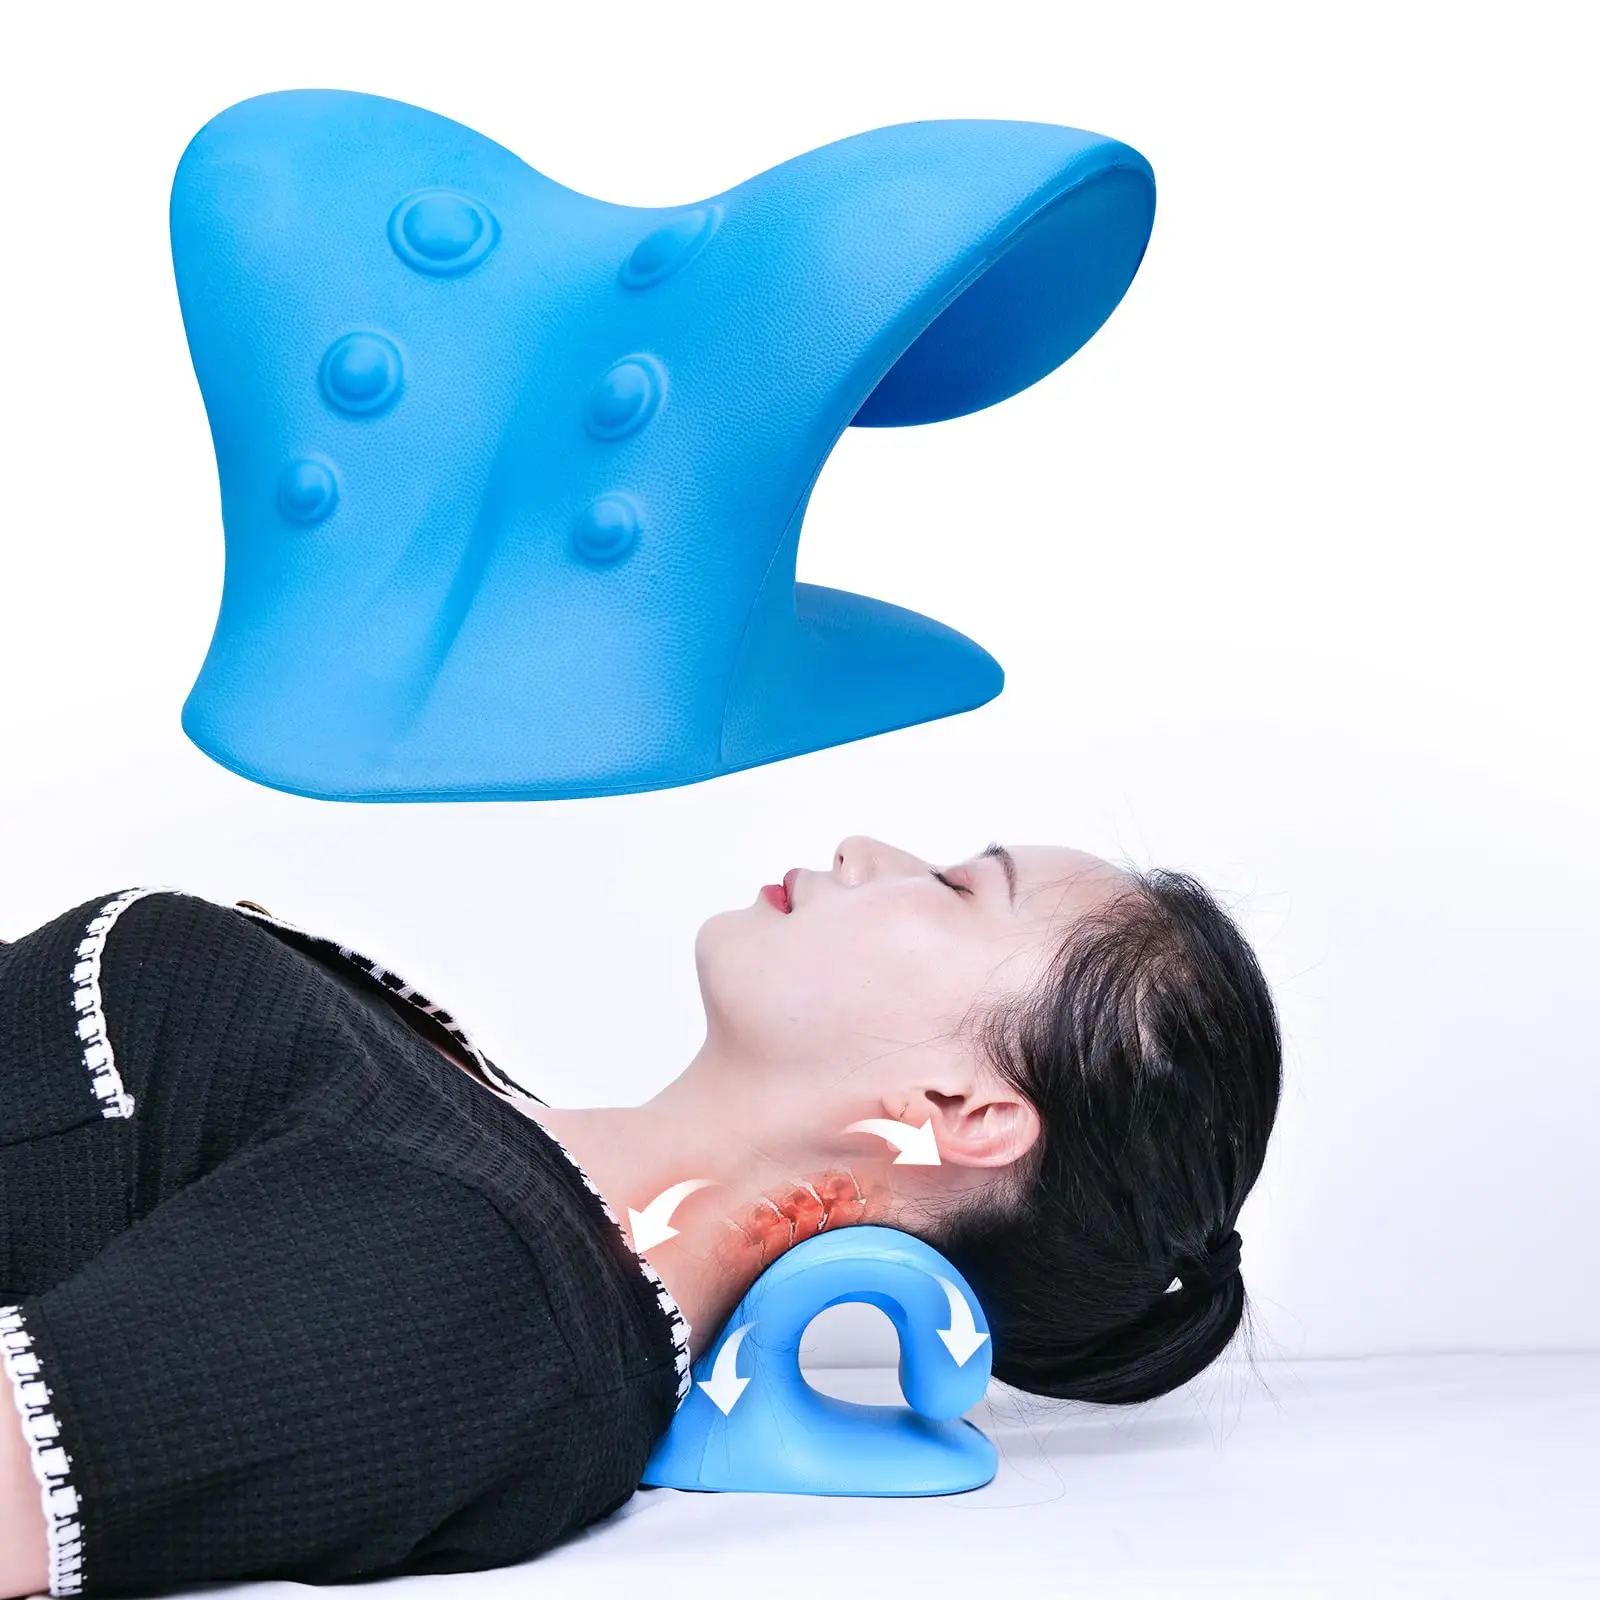 

Neck Shoulder Relaxer Stretcher Cervical Traction Device Chiropractic Pillow Neck Cloud for Pain Relief Spine Alignment